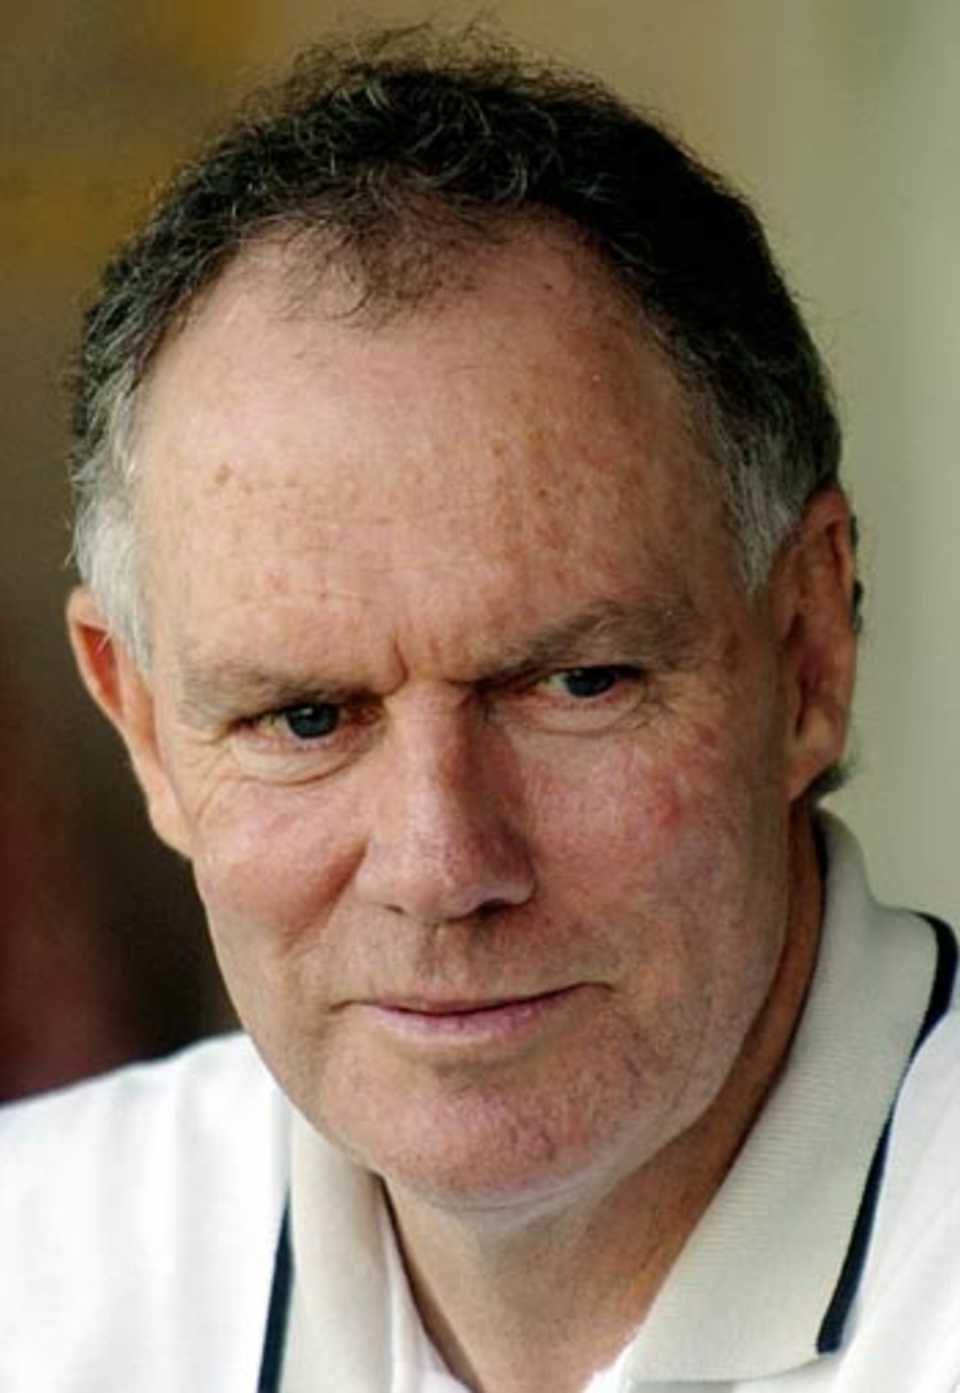 Greg Chappell at the Irani Trophy match, Railways v Rest of India, Chandigarh, October 3, 2005